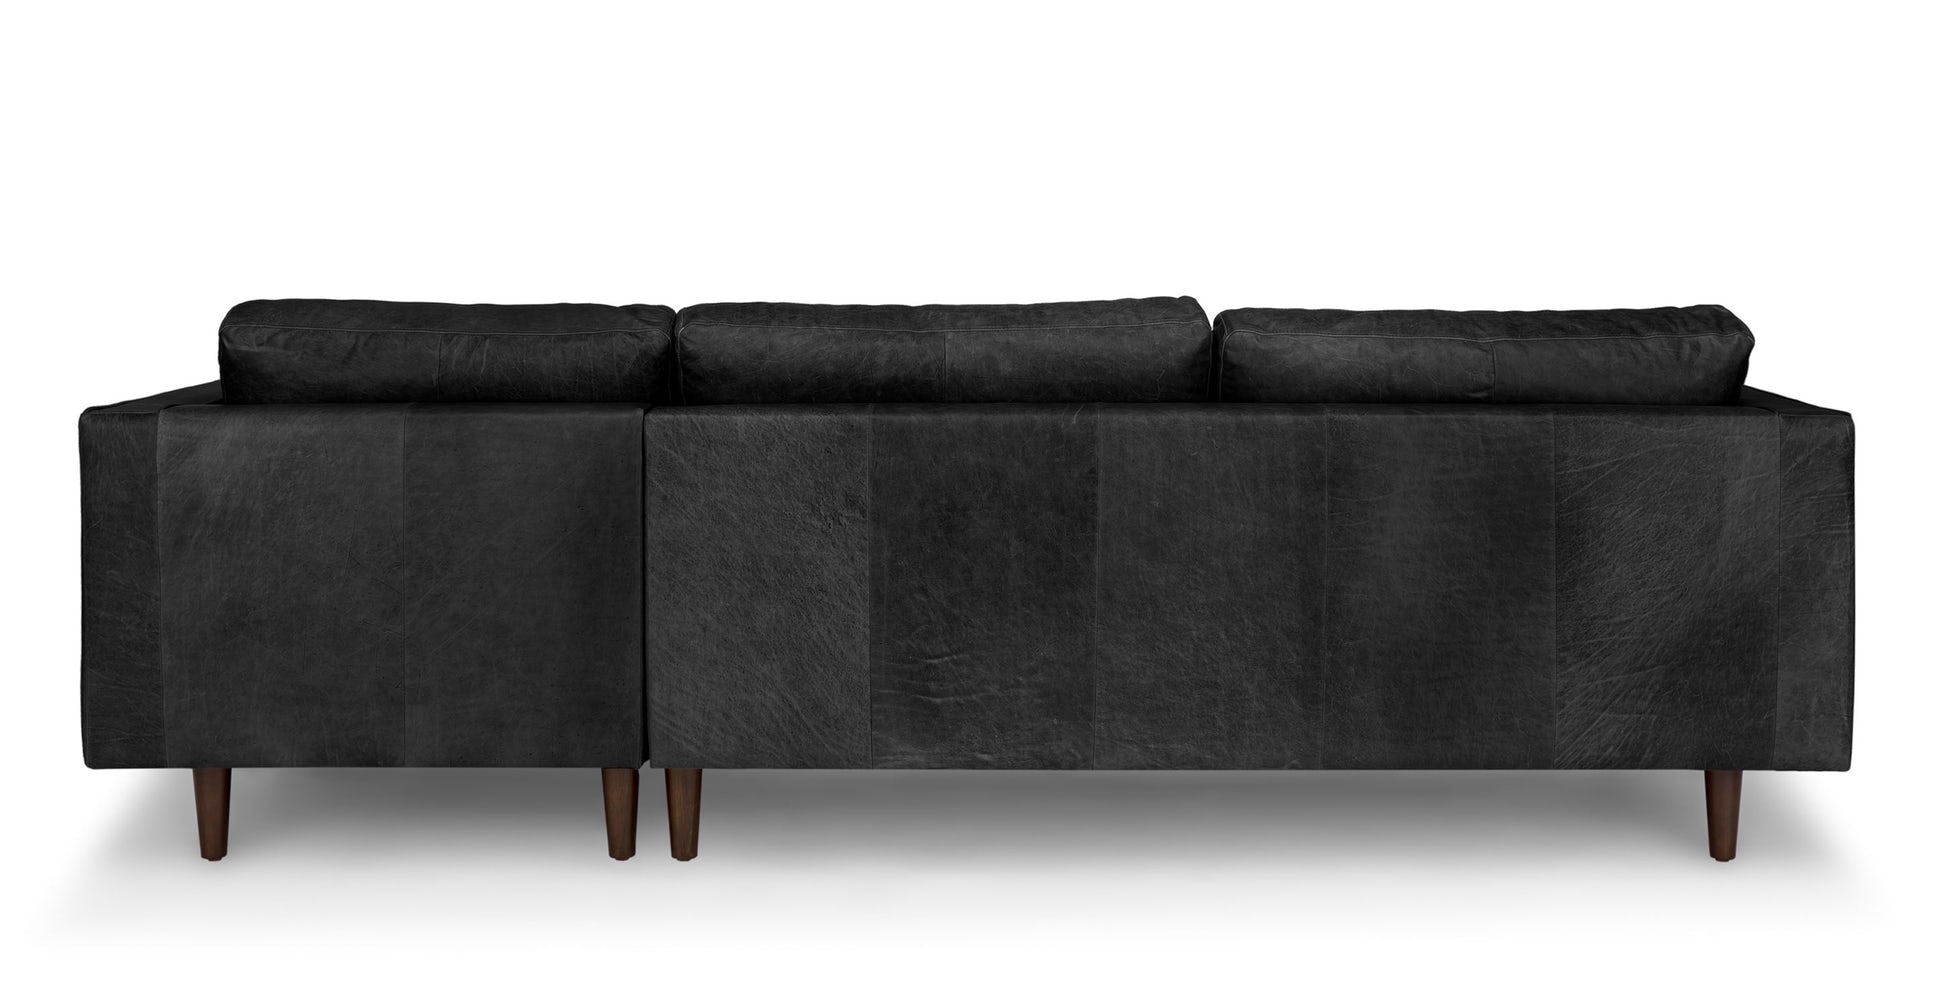 Sven Oxford Black Right Sectional Sofa - Image 6